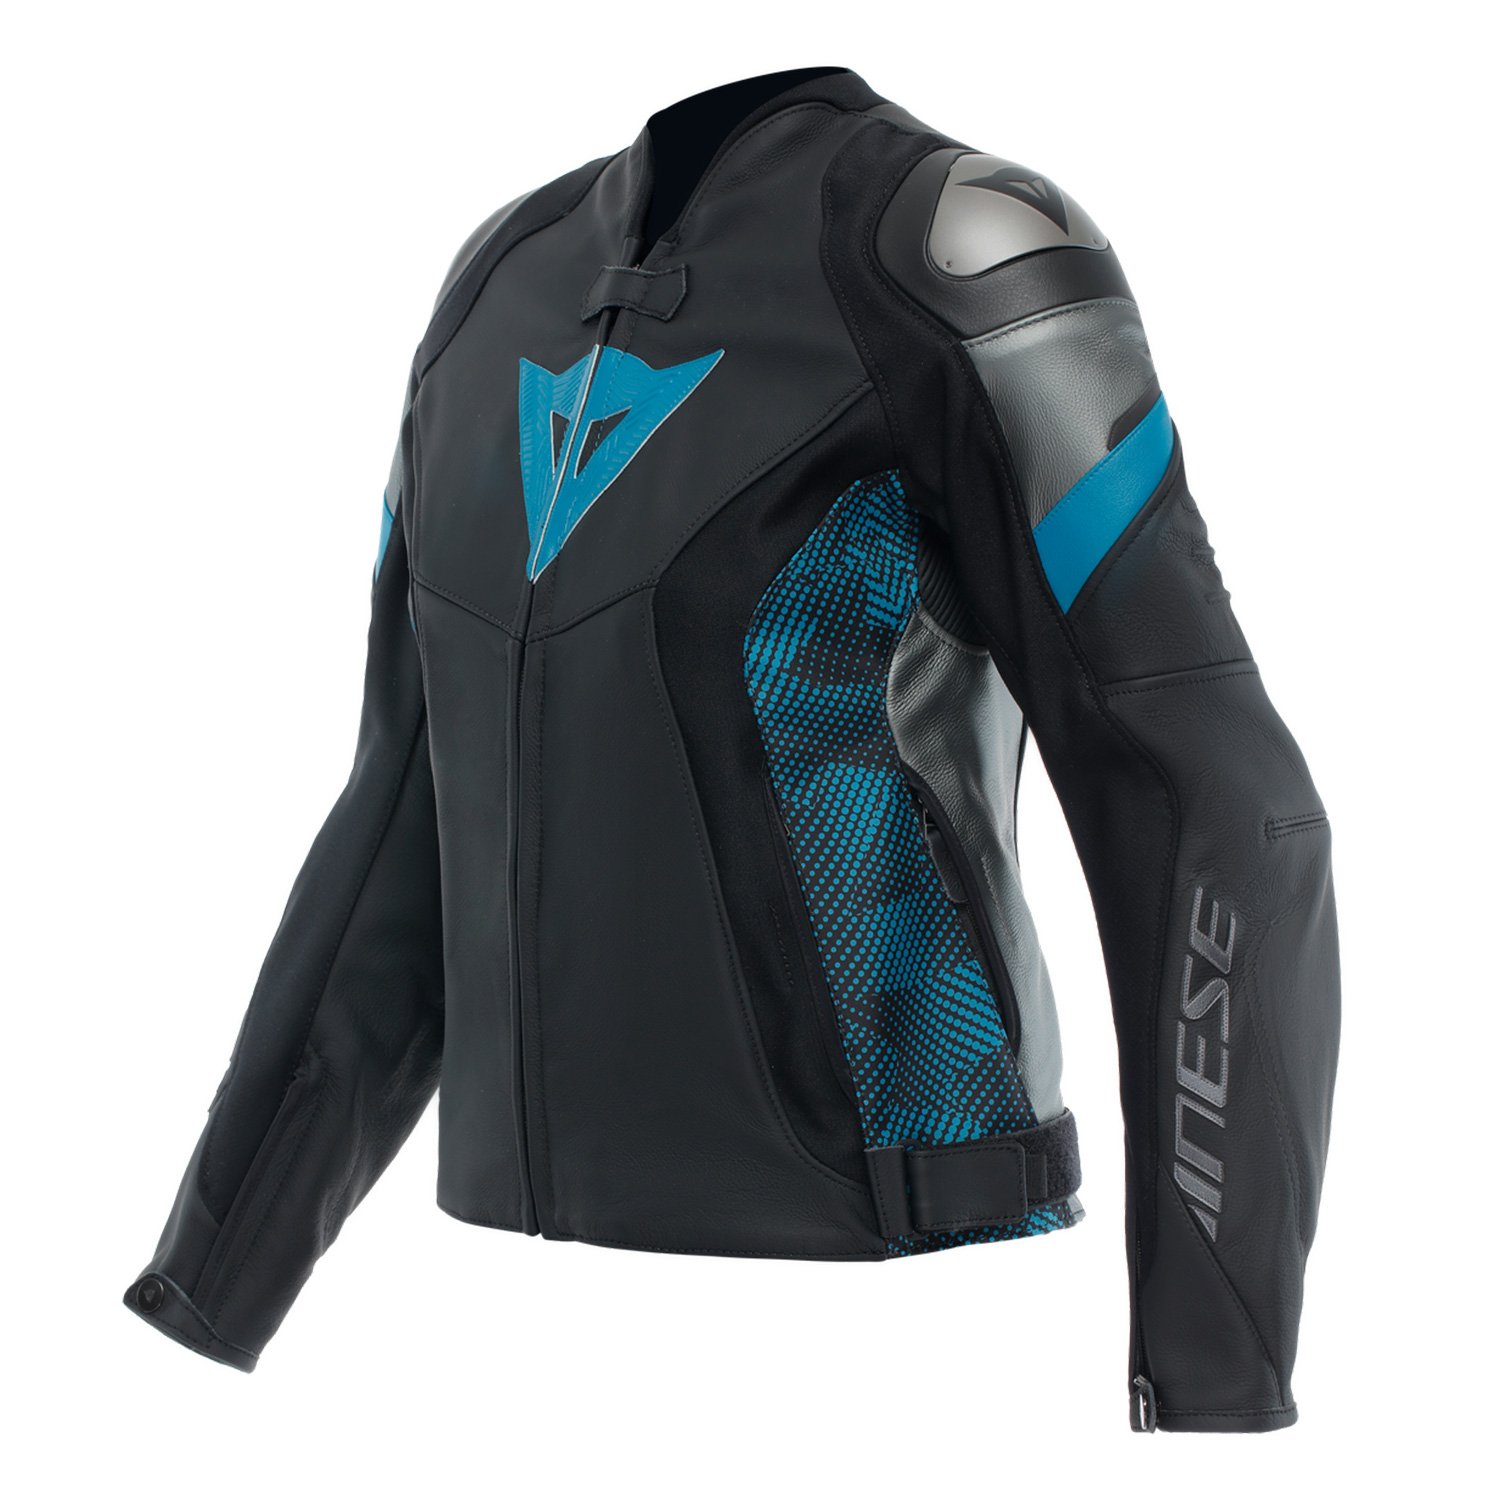 Image of Dainese Avro 5 Leather Jacket WMN Black Teal Anthracite Size 46 EN